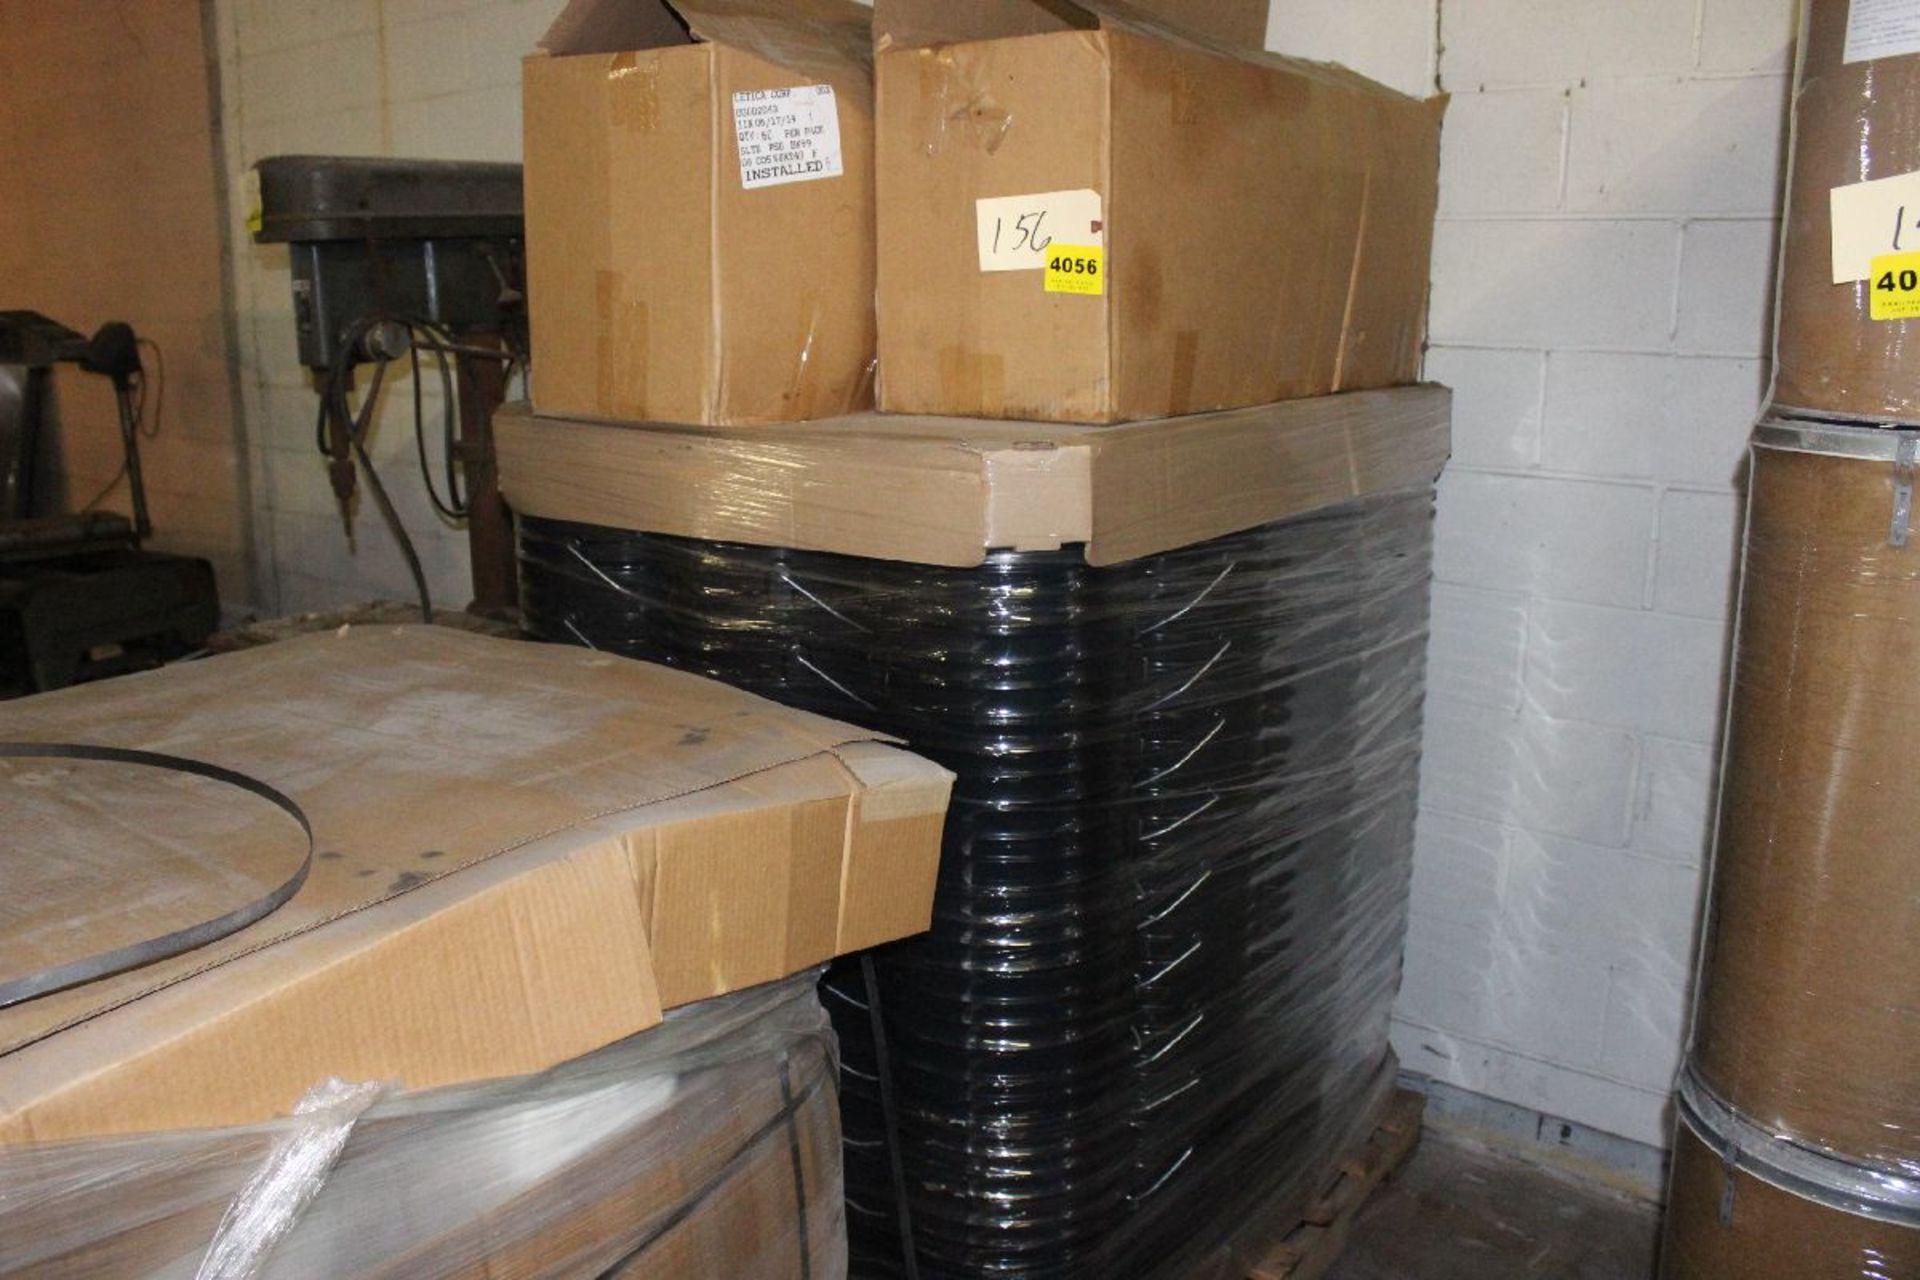 5-GAL BUCKETS AND LIDS, ON SKID Loading Fee: $20